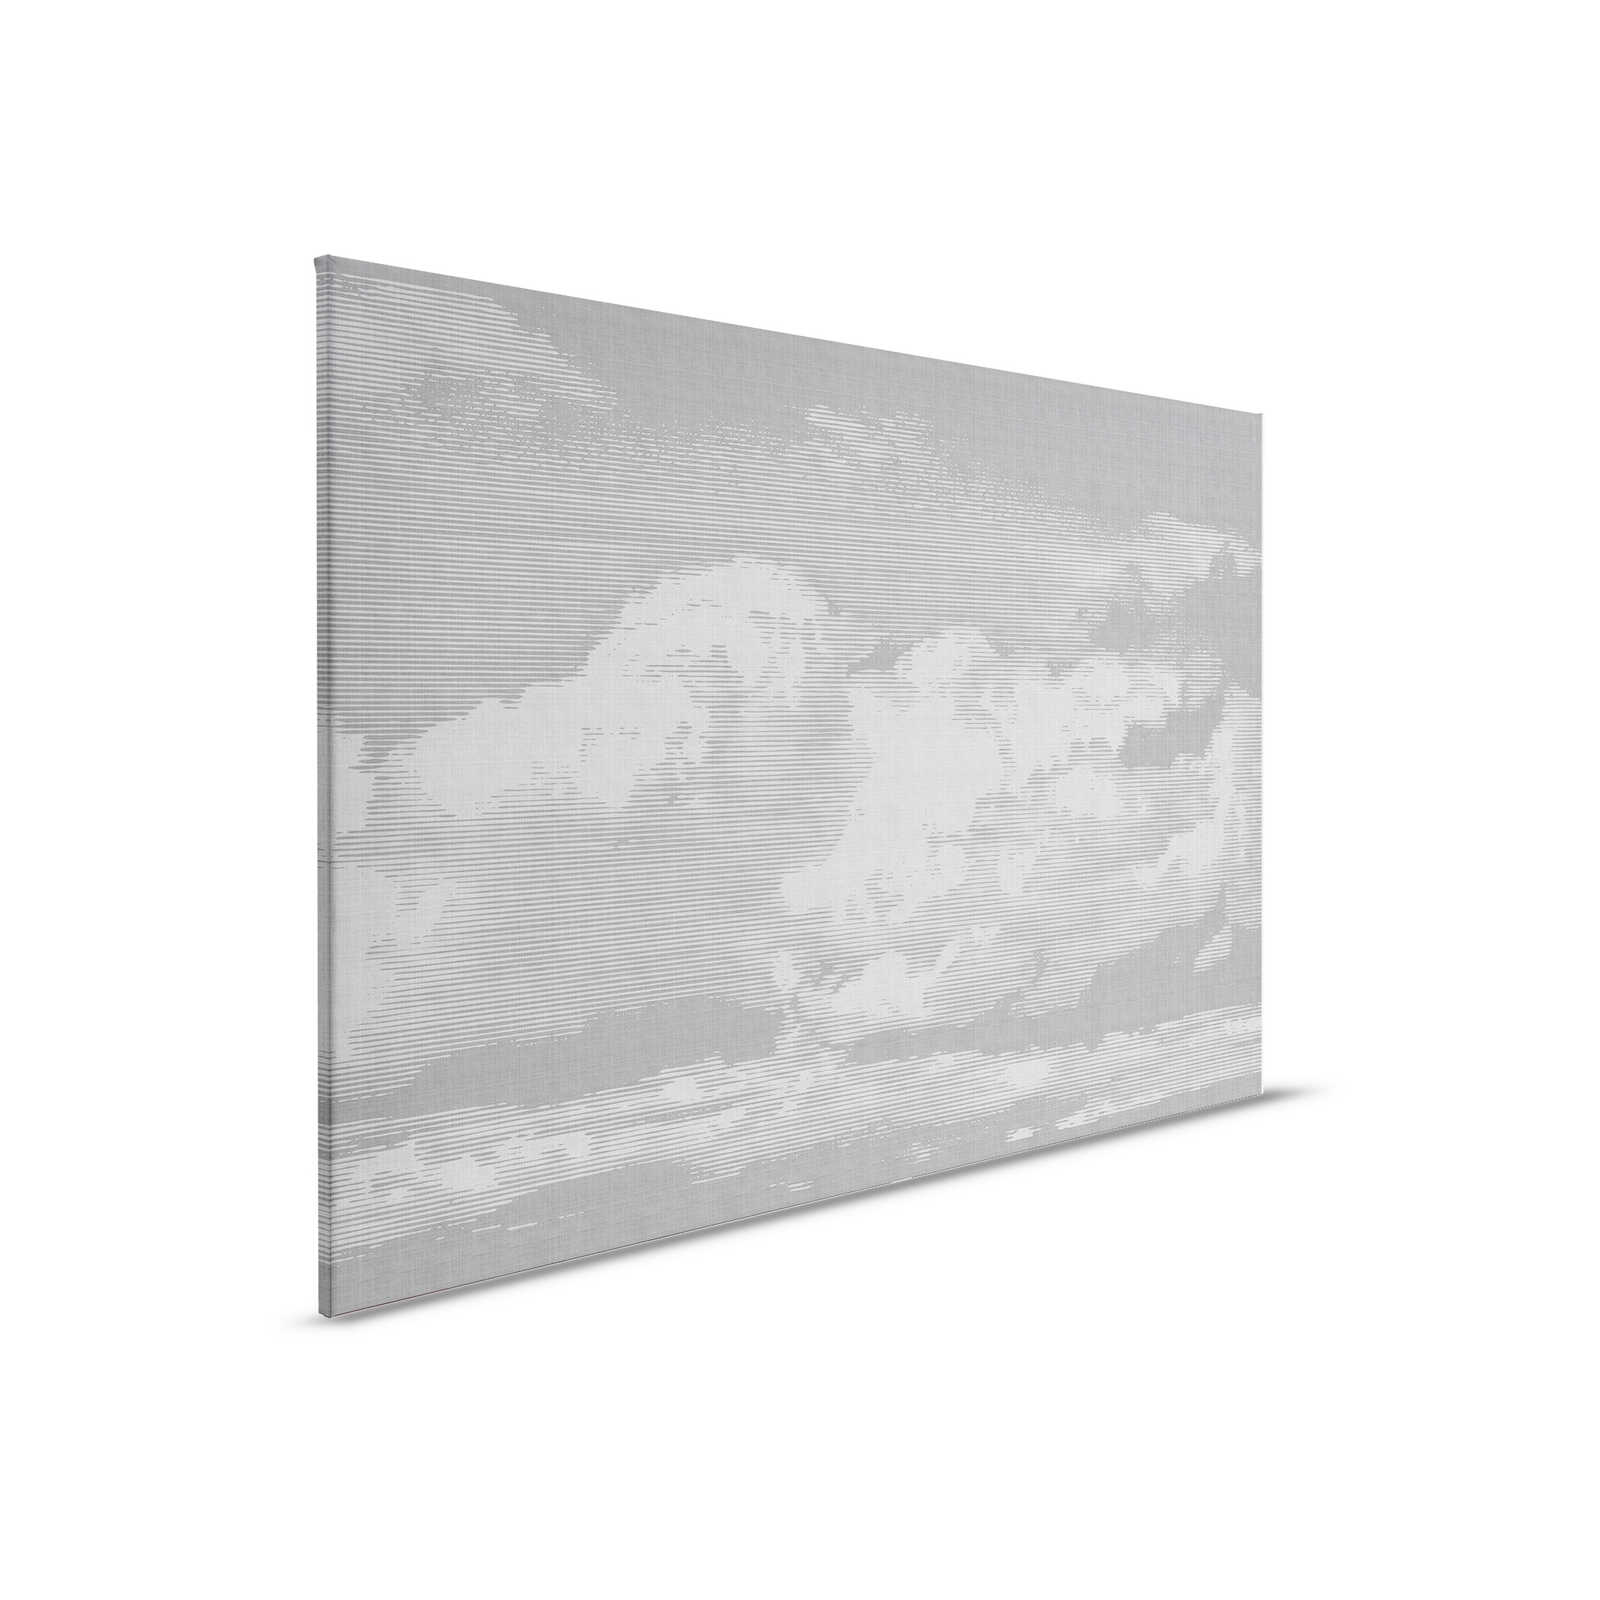 Clouds 2 - Heavenly canvas picture in natural linen look with cloud motif - 0.90 m x 0.60 m
